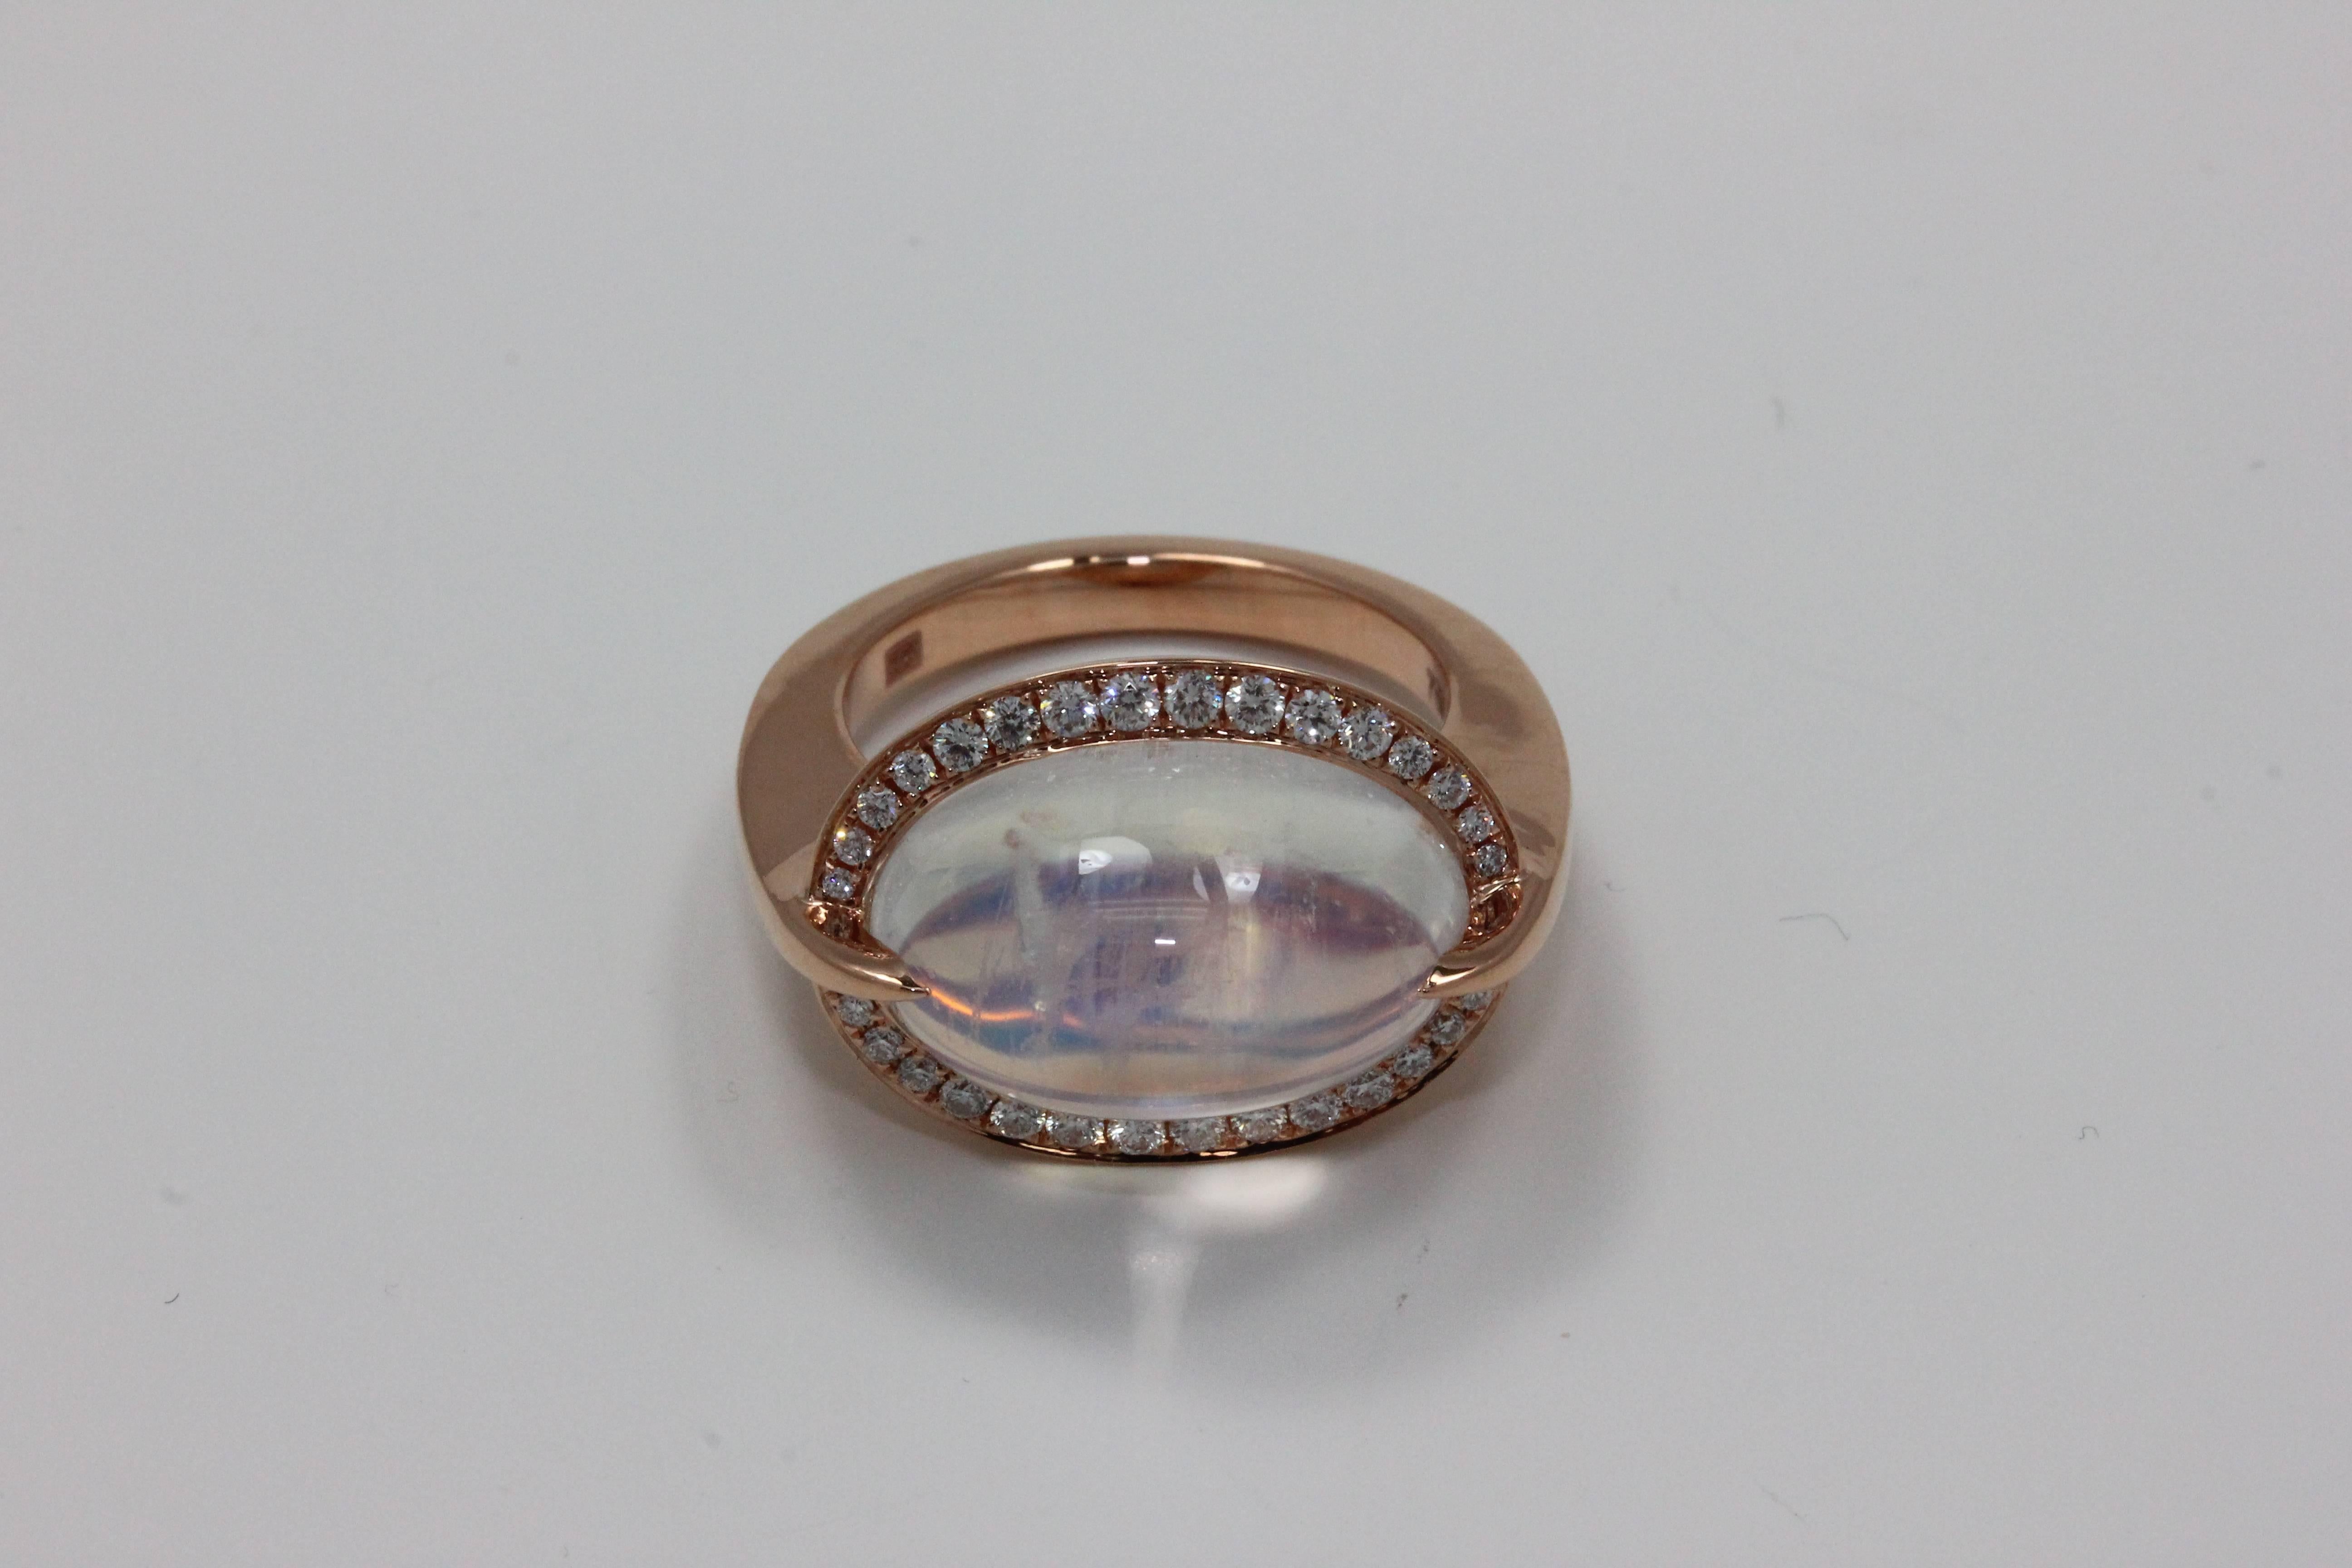 One-of-a-kind Frederic Sage oval cabochon Moonstone ring with diamond halo set in 18 karat rose gold

Total Moonstone weight: 11.40 ct
Total diamond count: 32
Total diamond weight: 0.36 ct